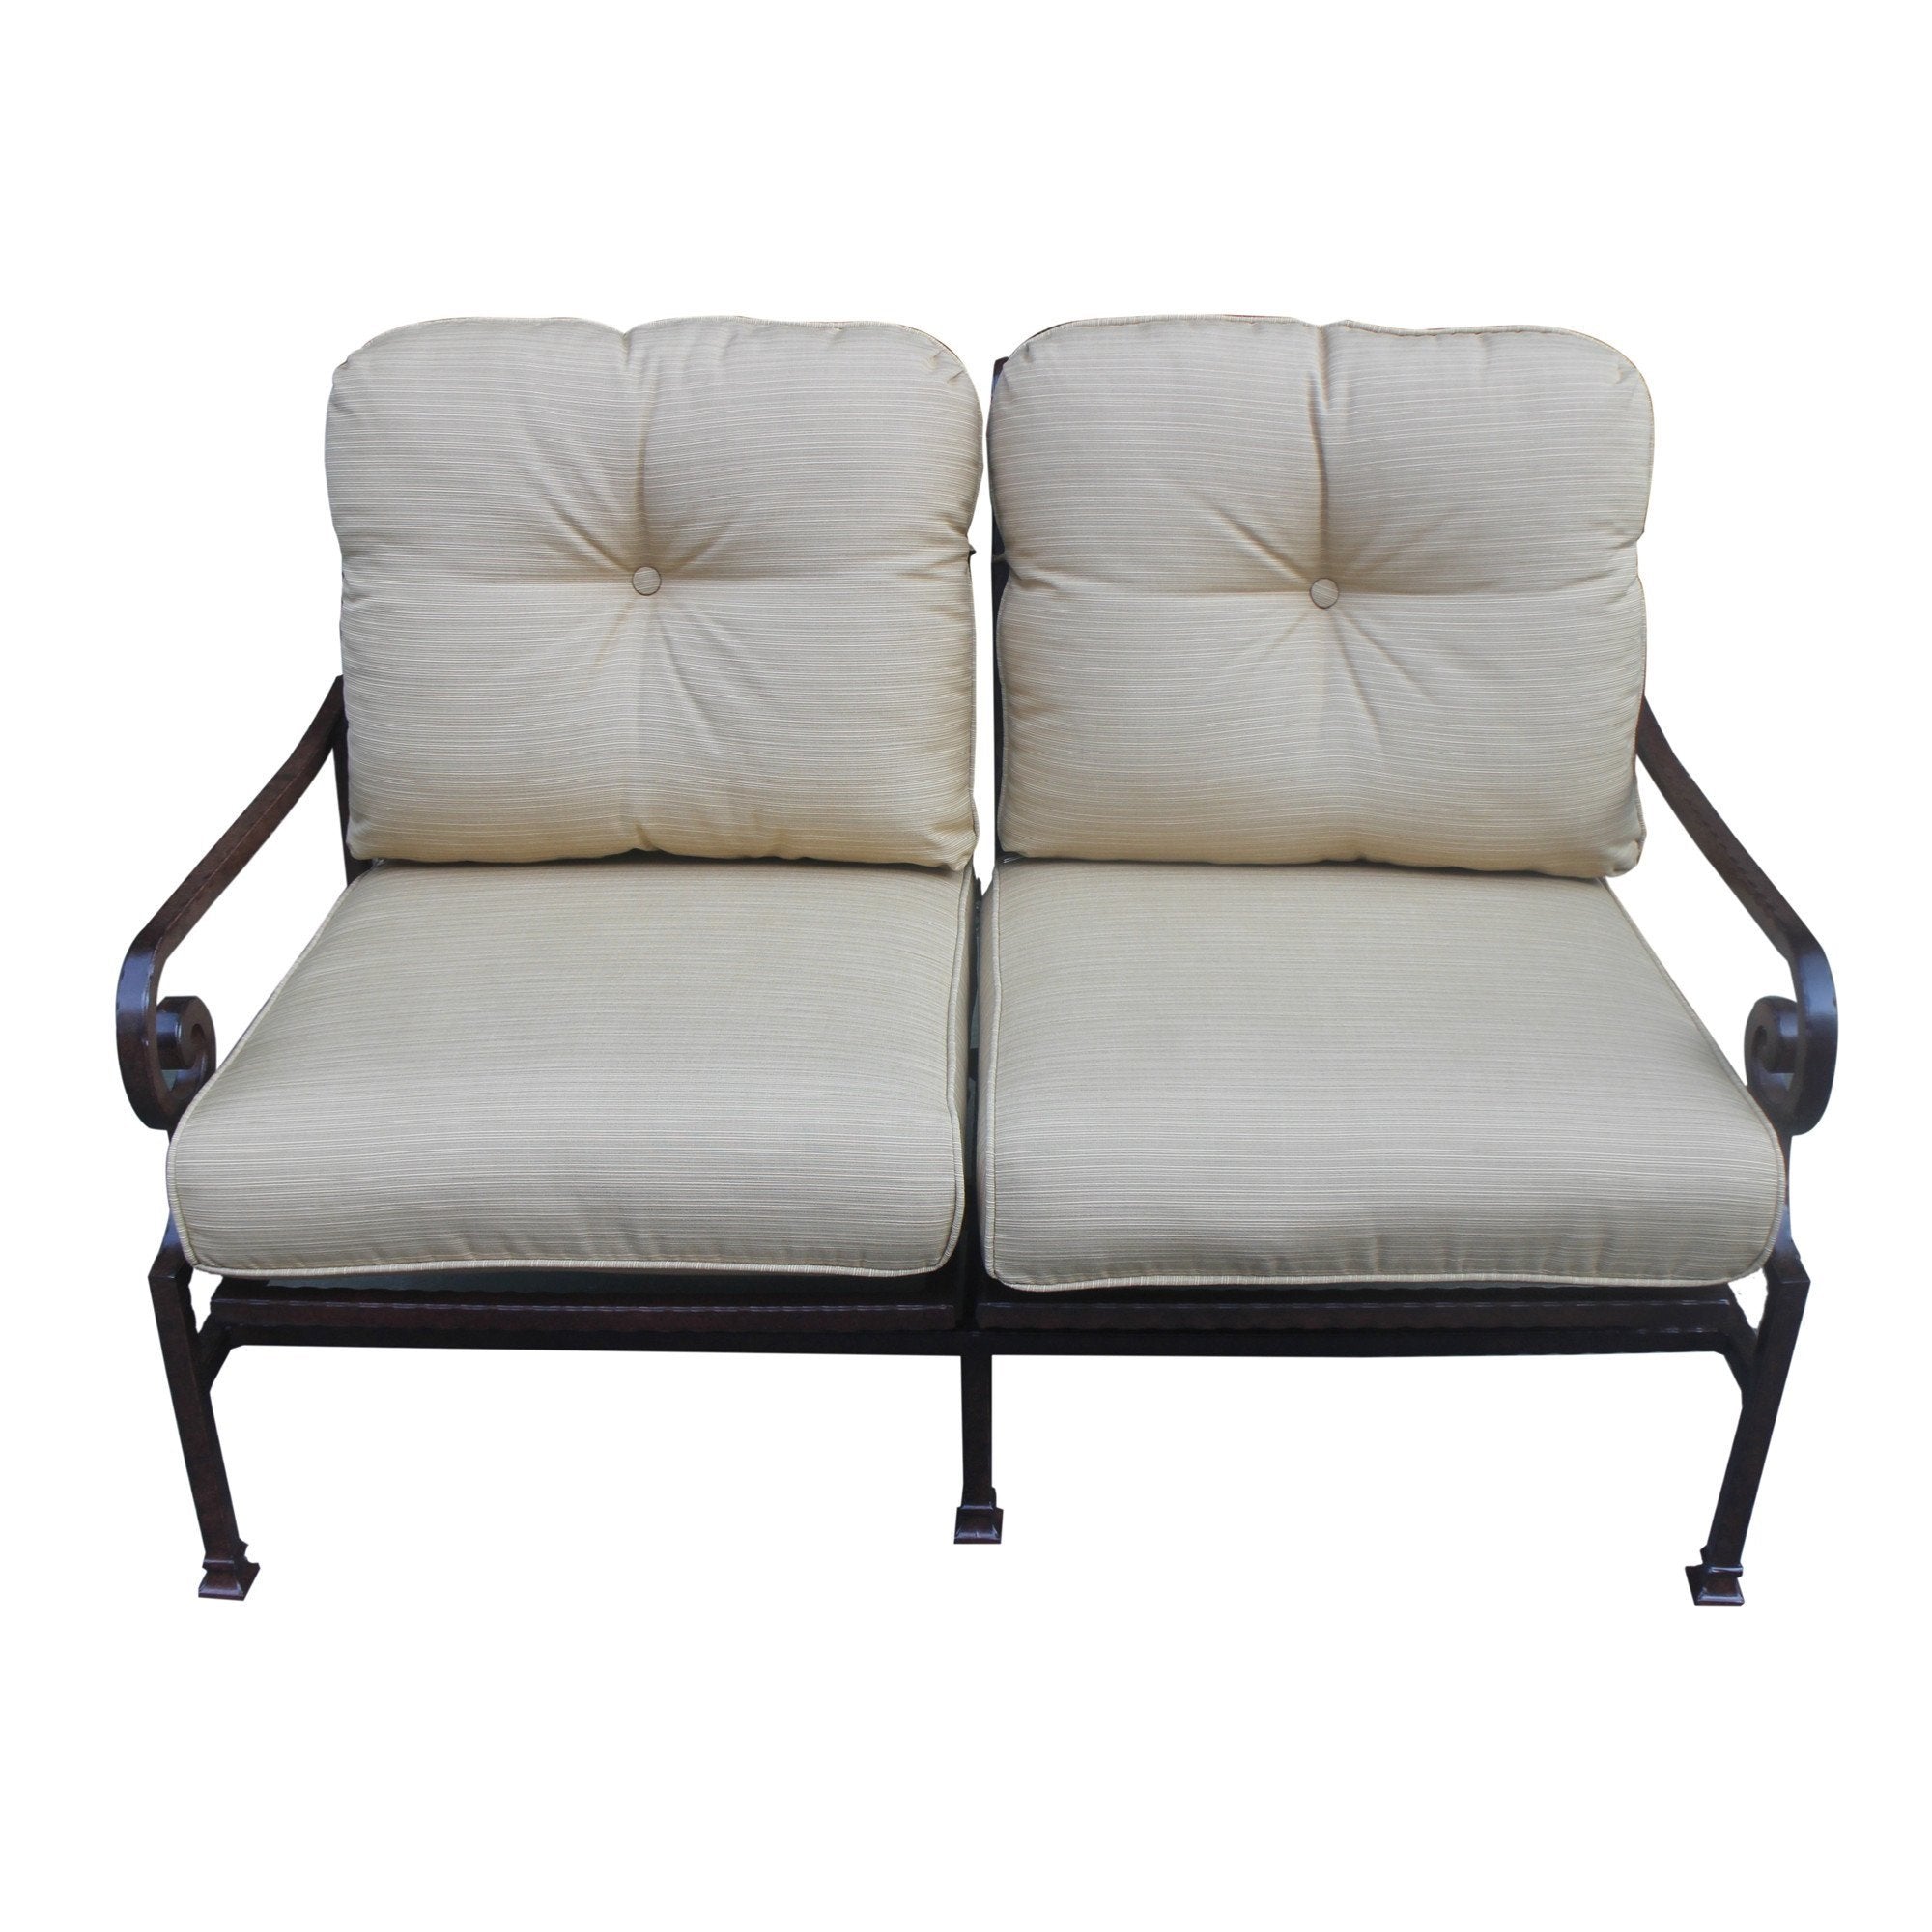 Outdoor Patio Cast Aluminum Frame Loveseat Motion Chair With Cushion Onsite-Boyel Living